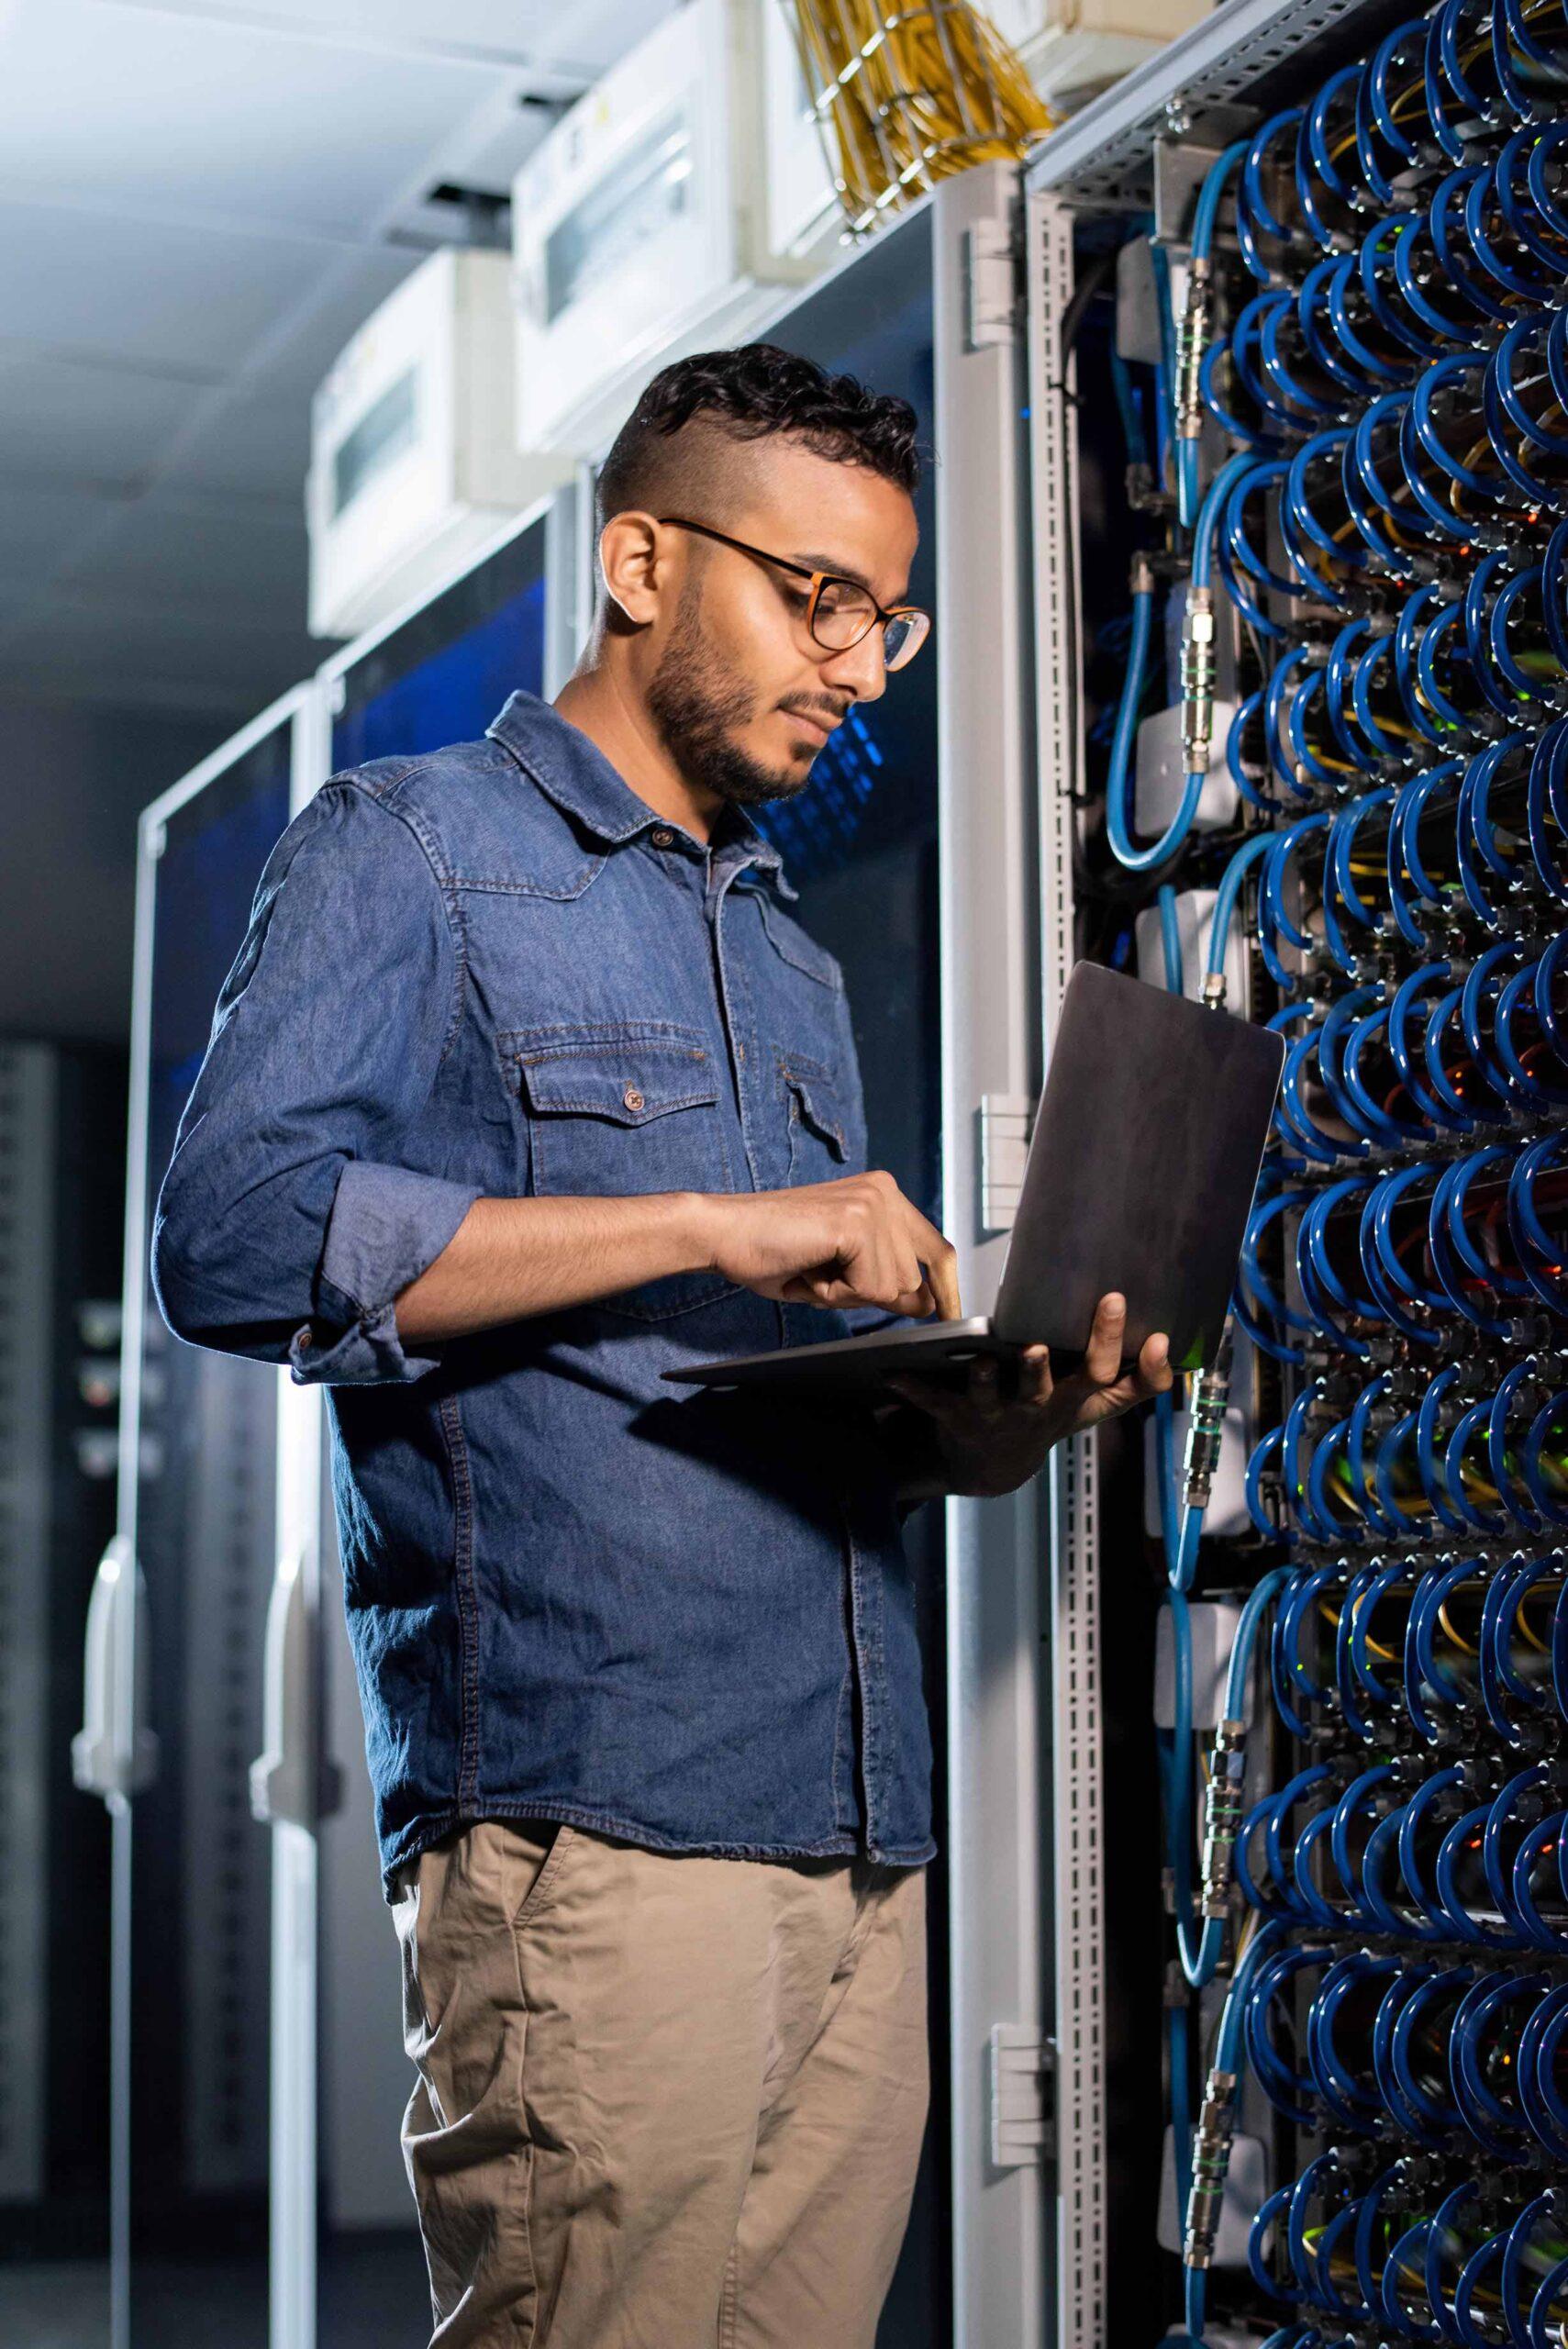 Network specialist working on a laptop in a data center